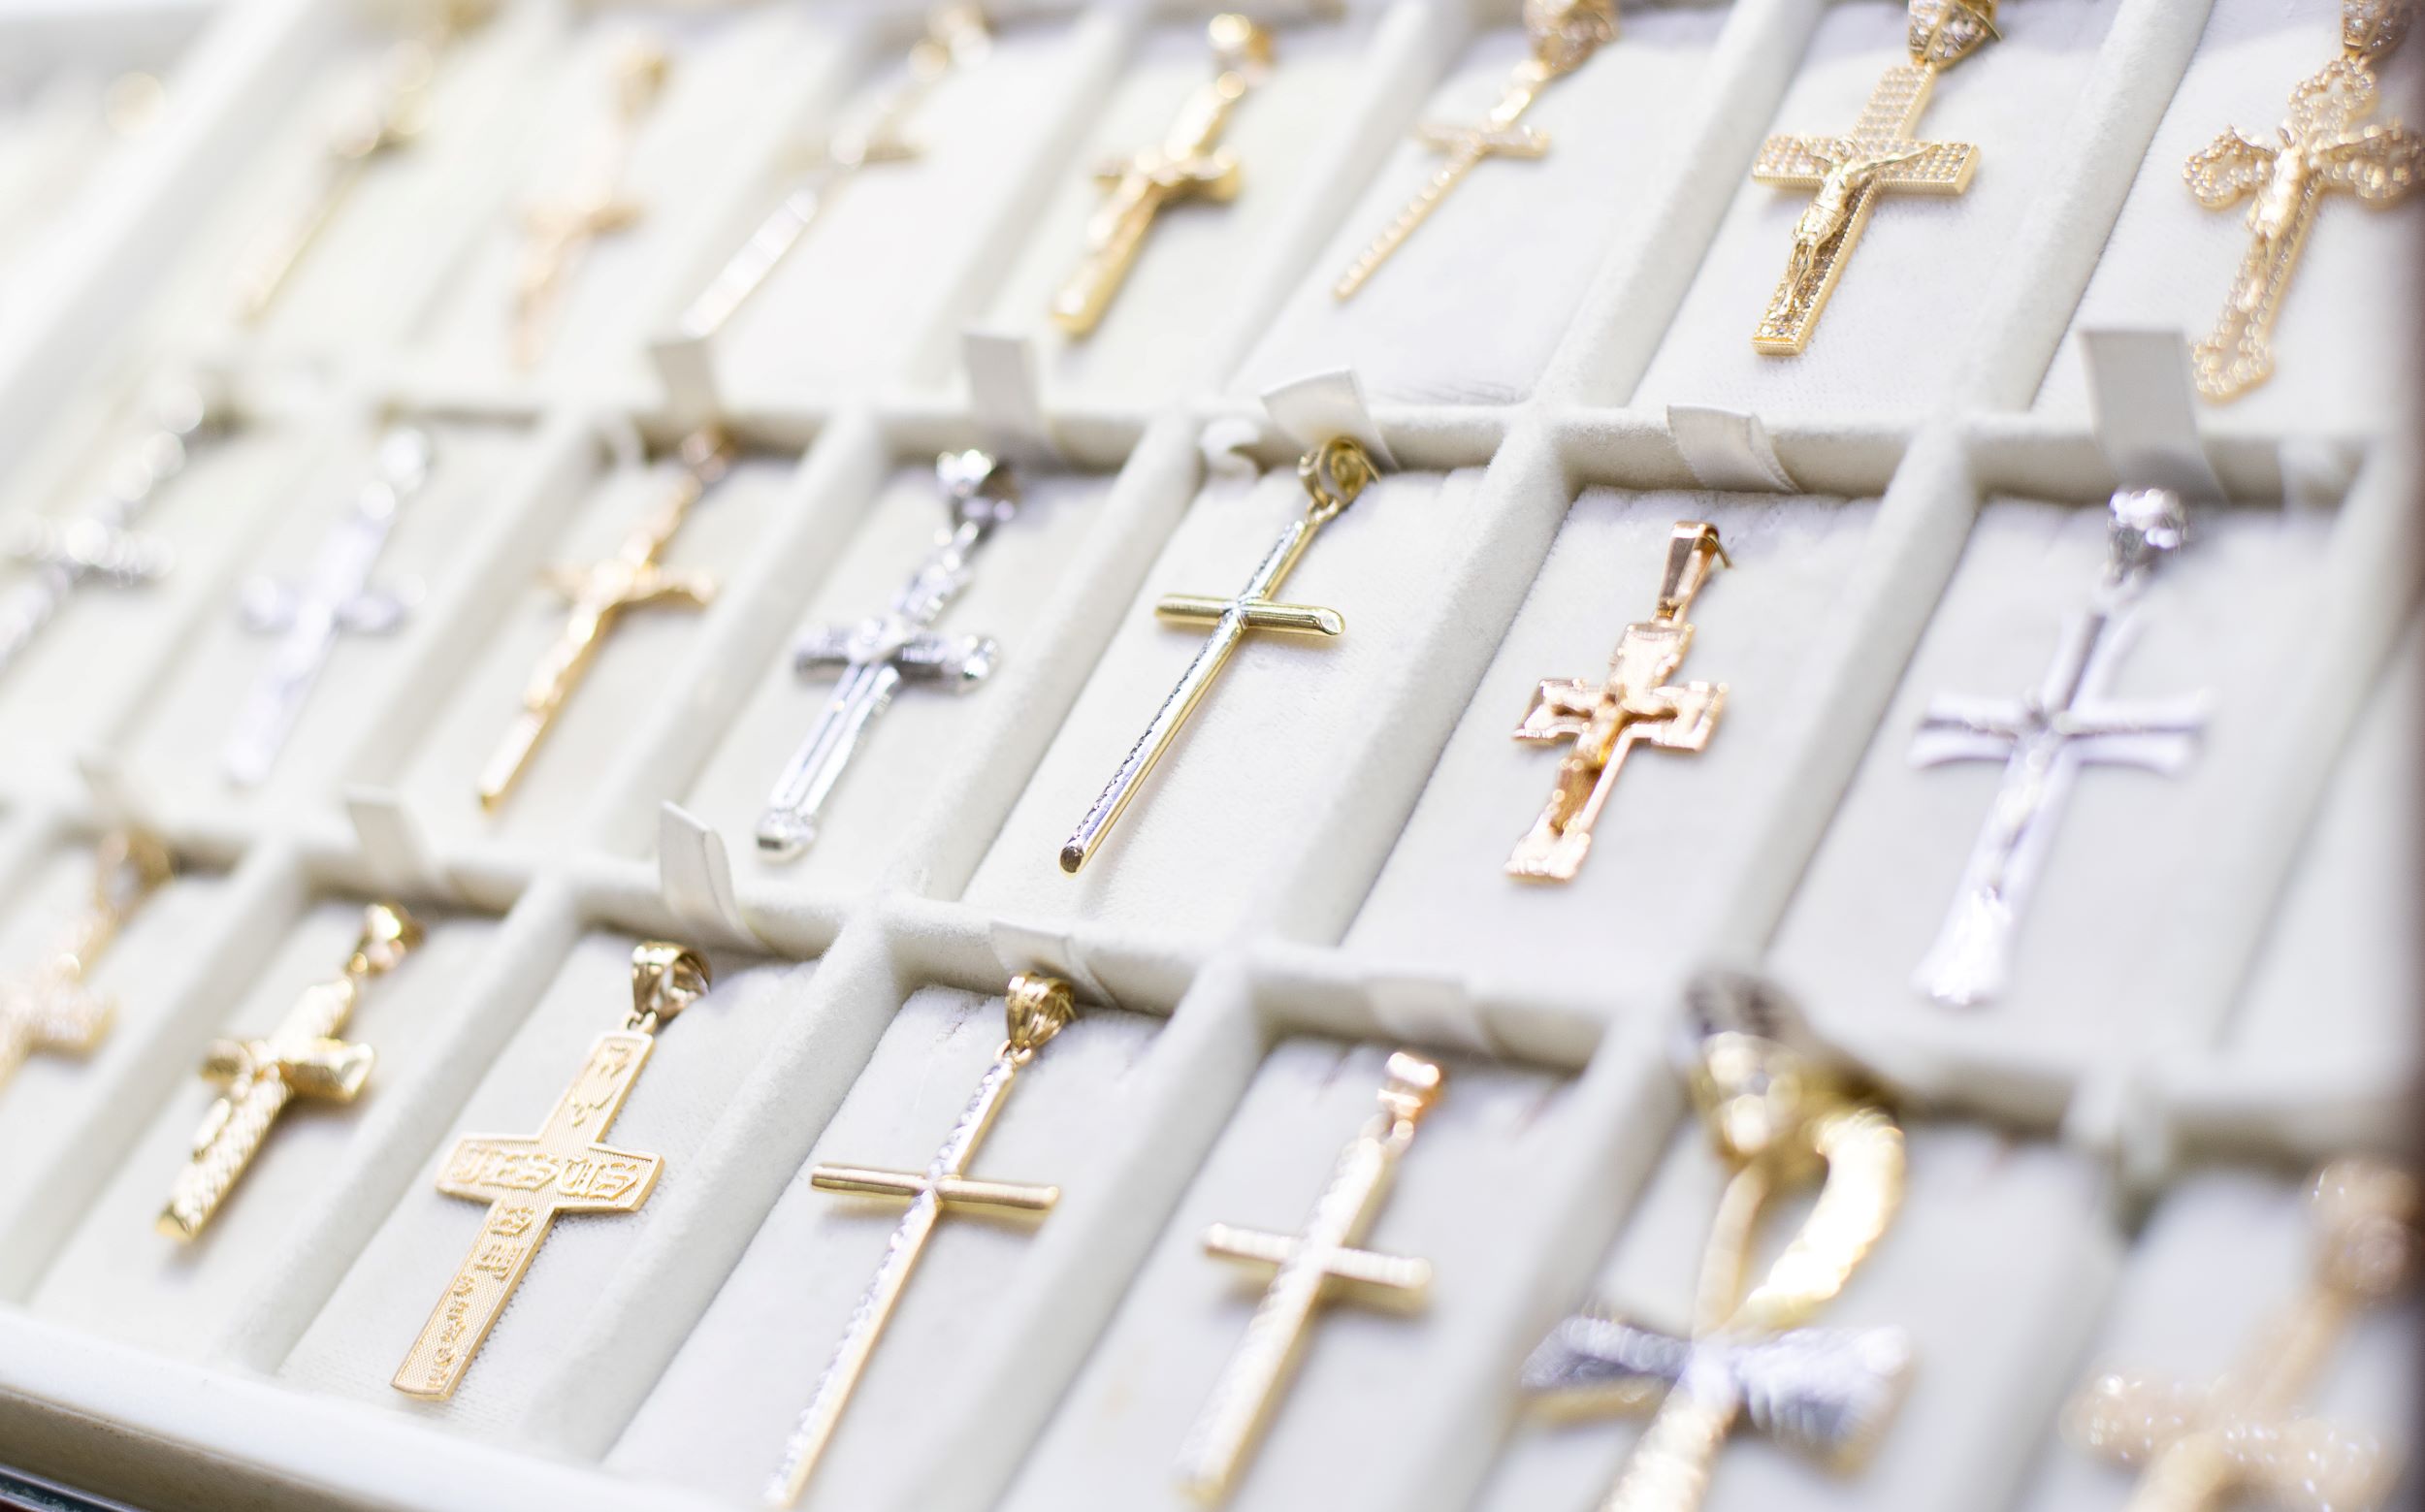 A selection of various cross pendants displayed in a jewelry store tray, featuring different designs and materials with a focus on a central gold cross.